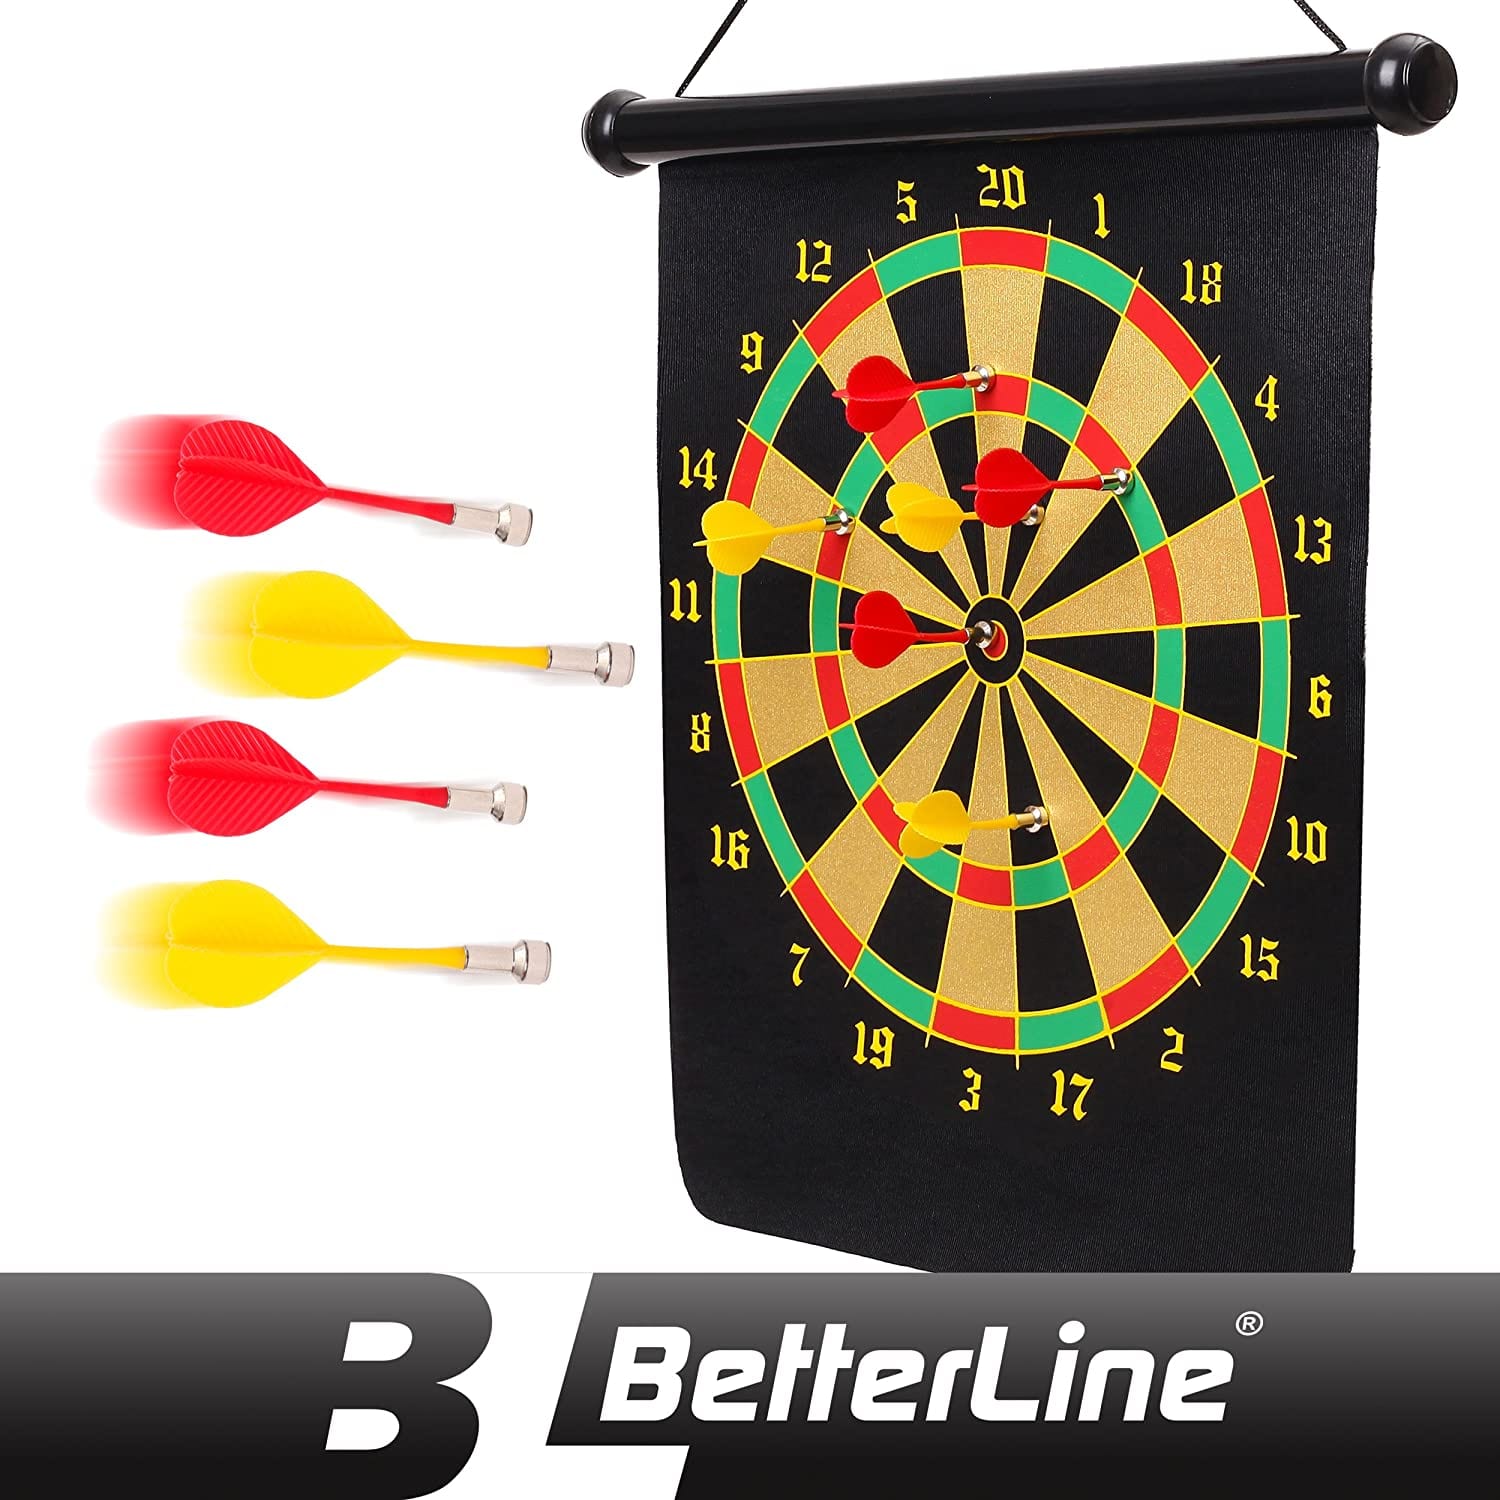 BETTERLINE Magnetic Dart Board Game Set - 16 x 19 Inch (41.5x47.5cm) Roll-up Board with 6 Darts